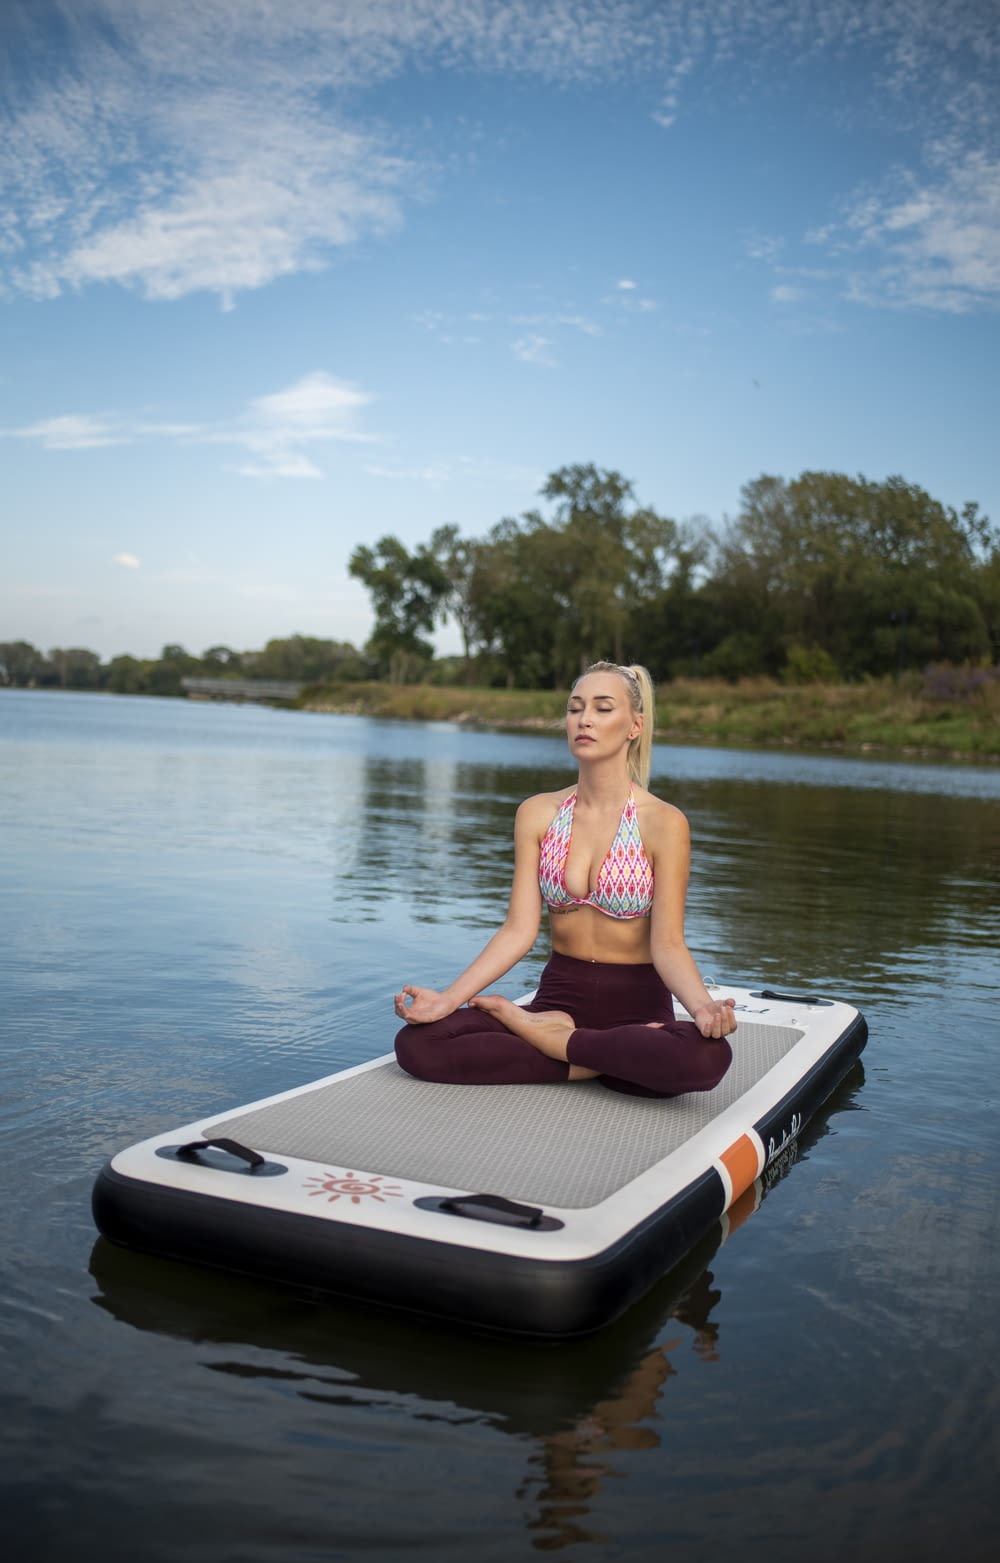 a woman in a bikini top is sitting on a floating device